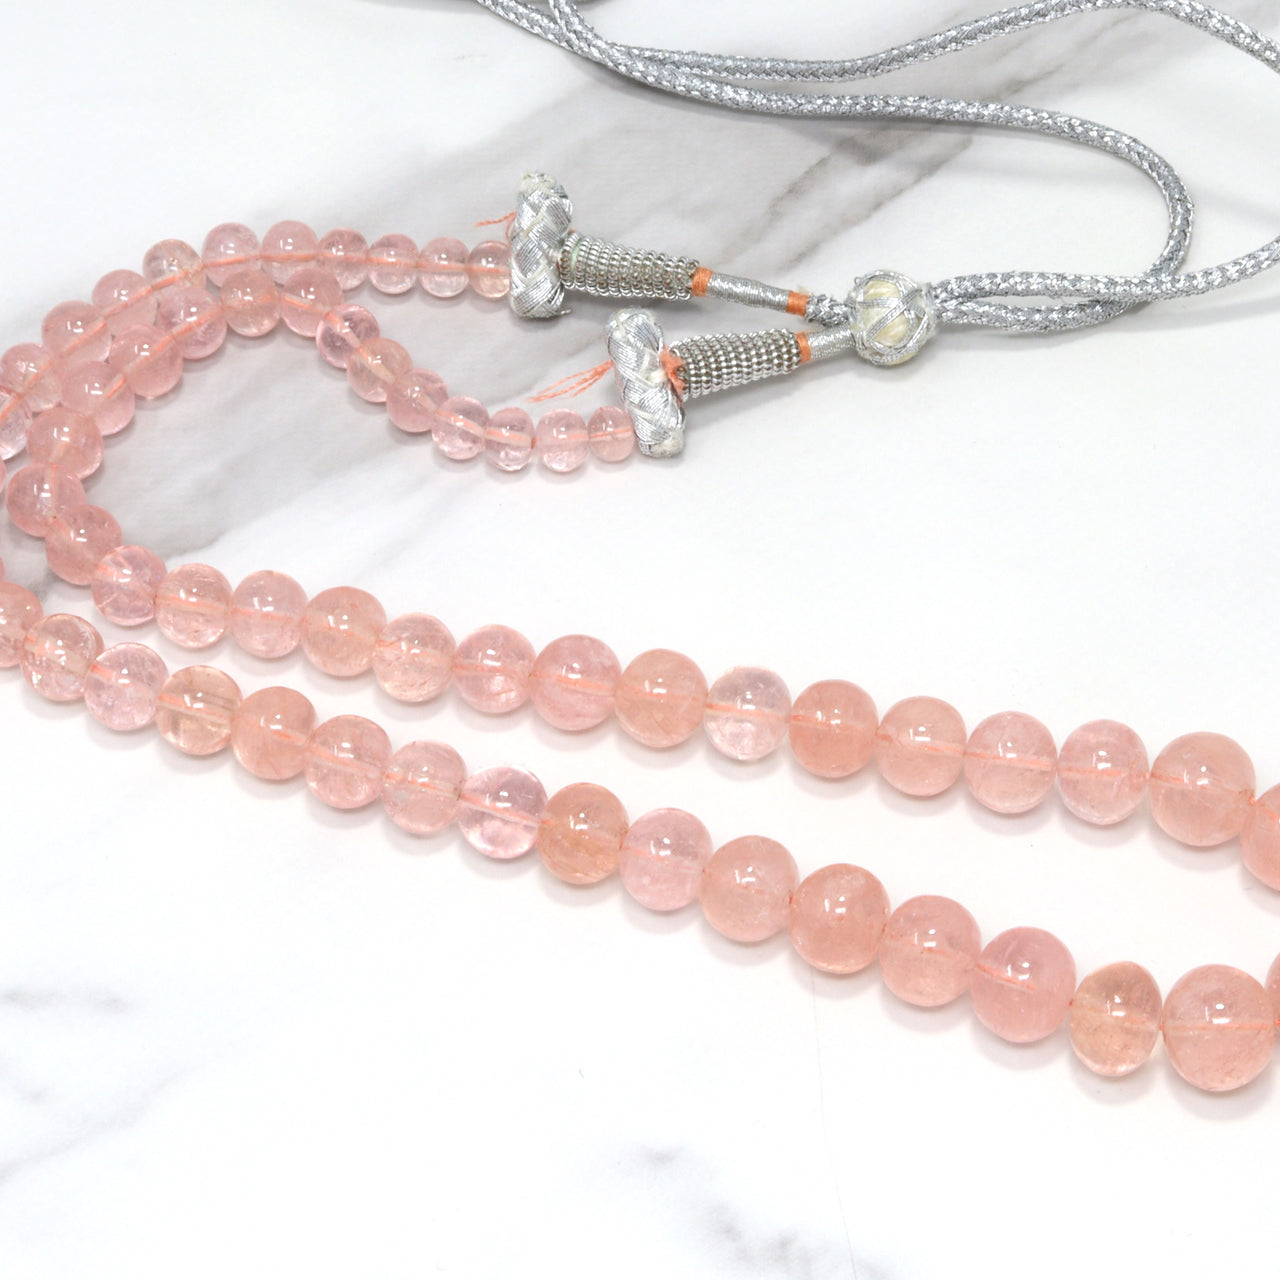 Pink Morganite 6mm-11mm Smooth Rondelles 1 Strand Bead Necklace